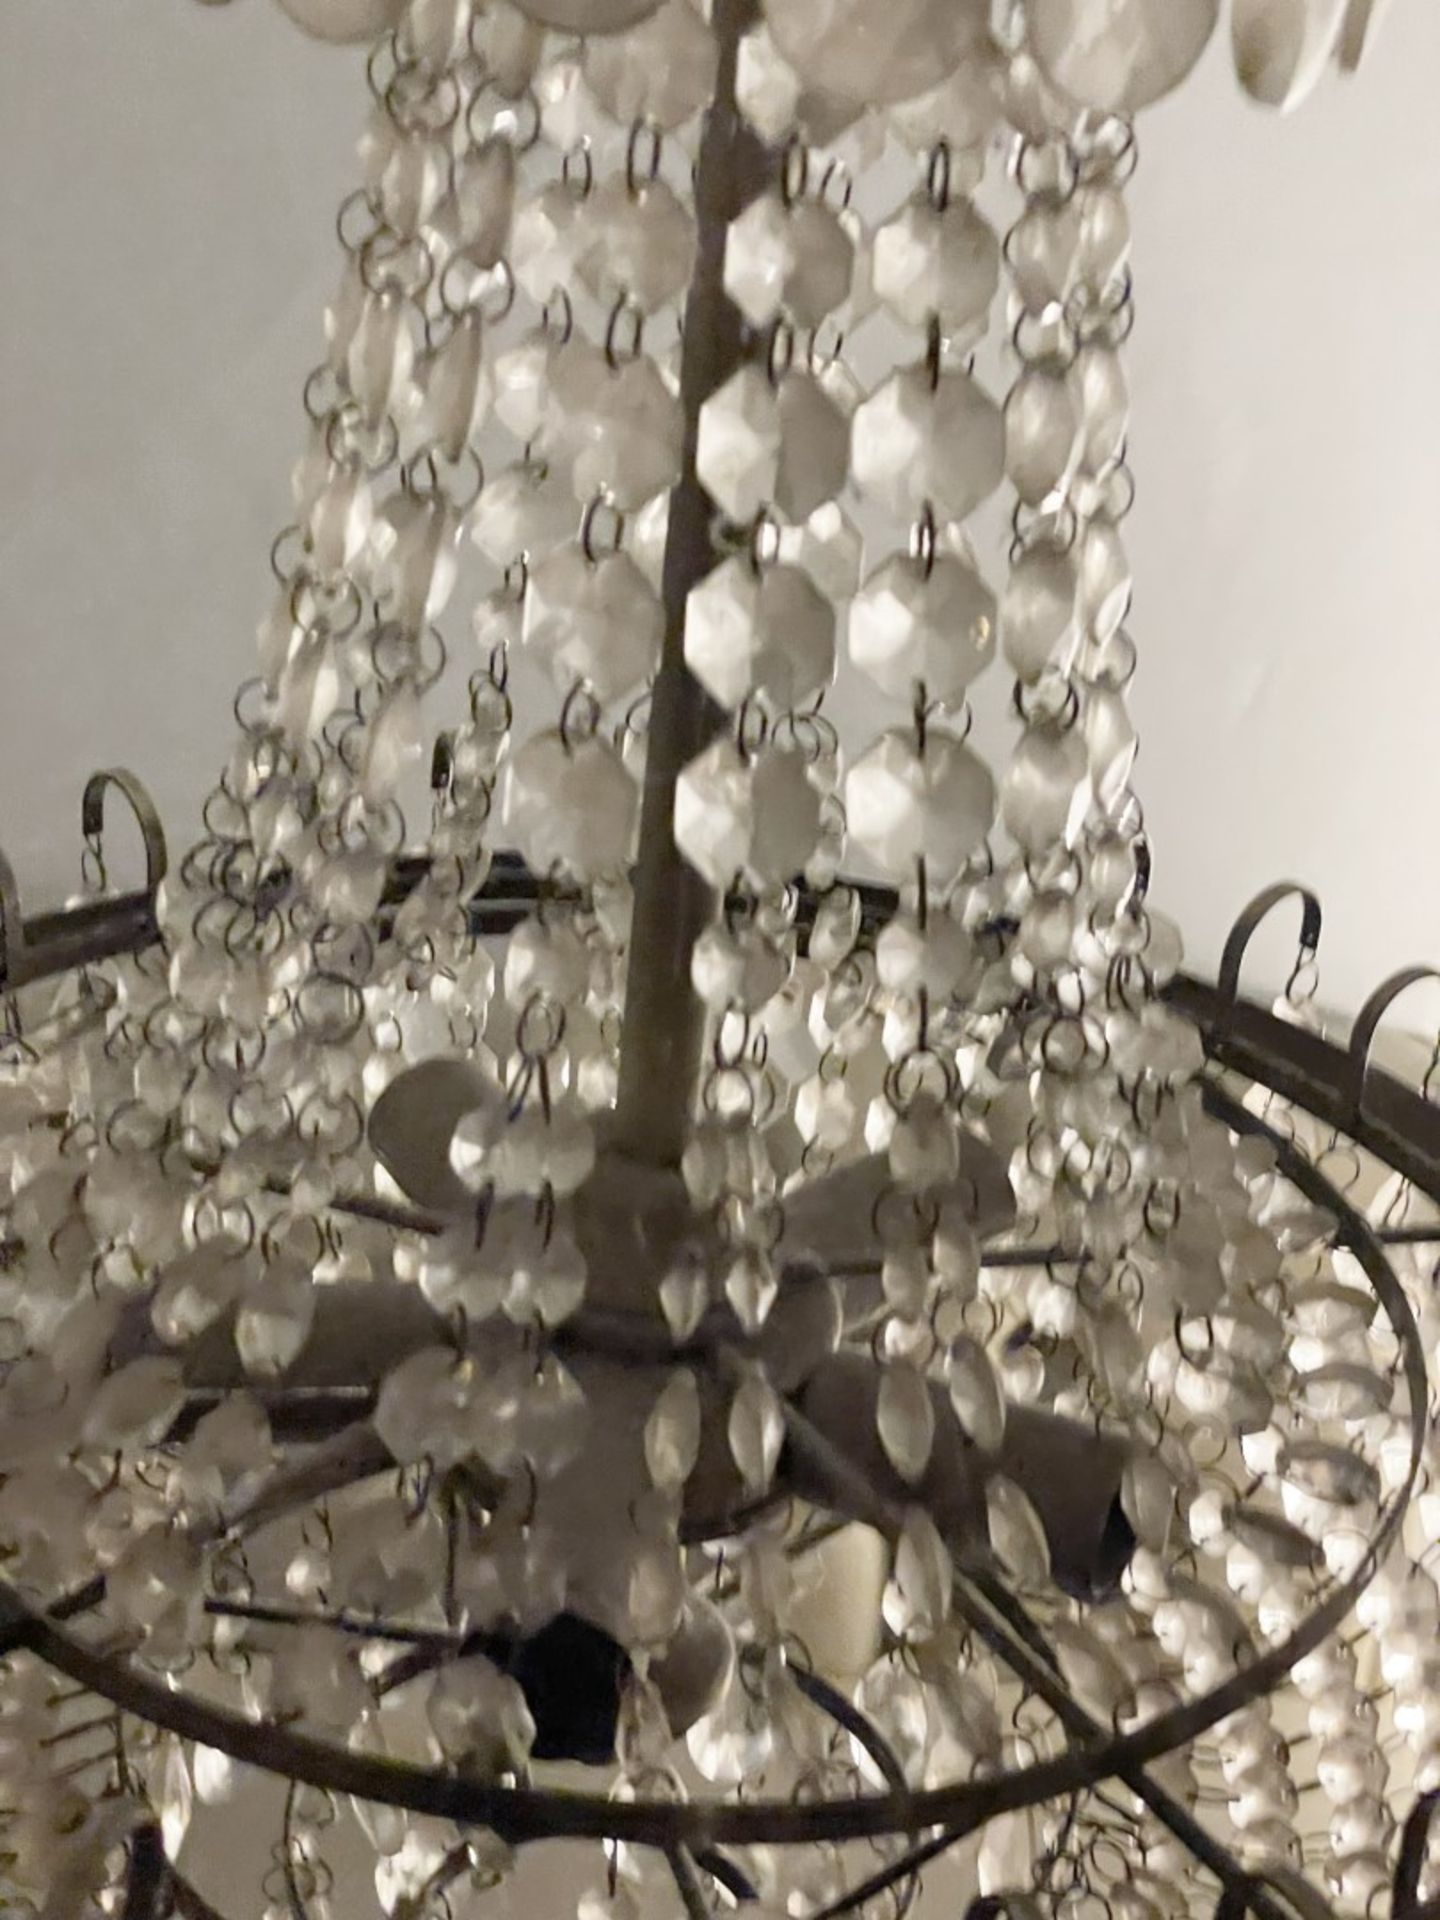 1 x Large Gustavian-style Chandelier Ceiling Pendant Light Adorned with Clear Droplets - Image 6 of 9